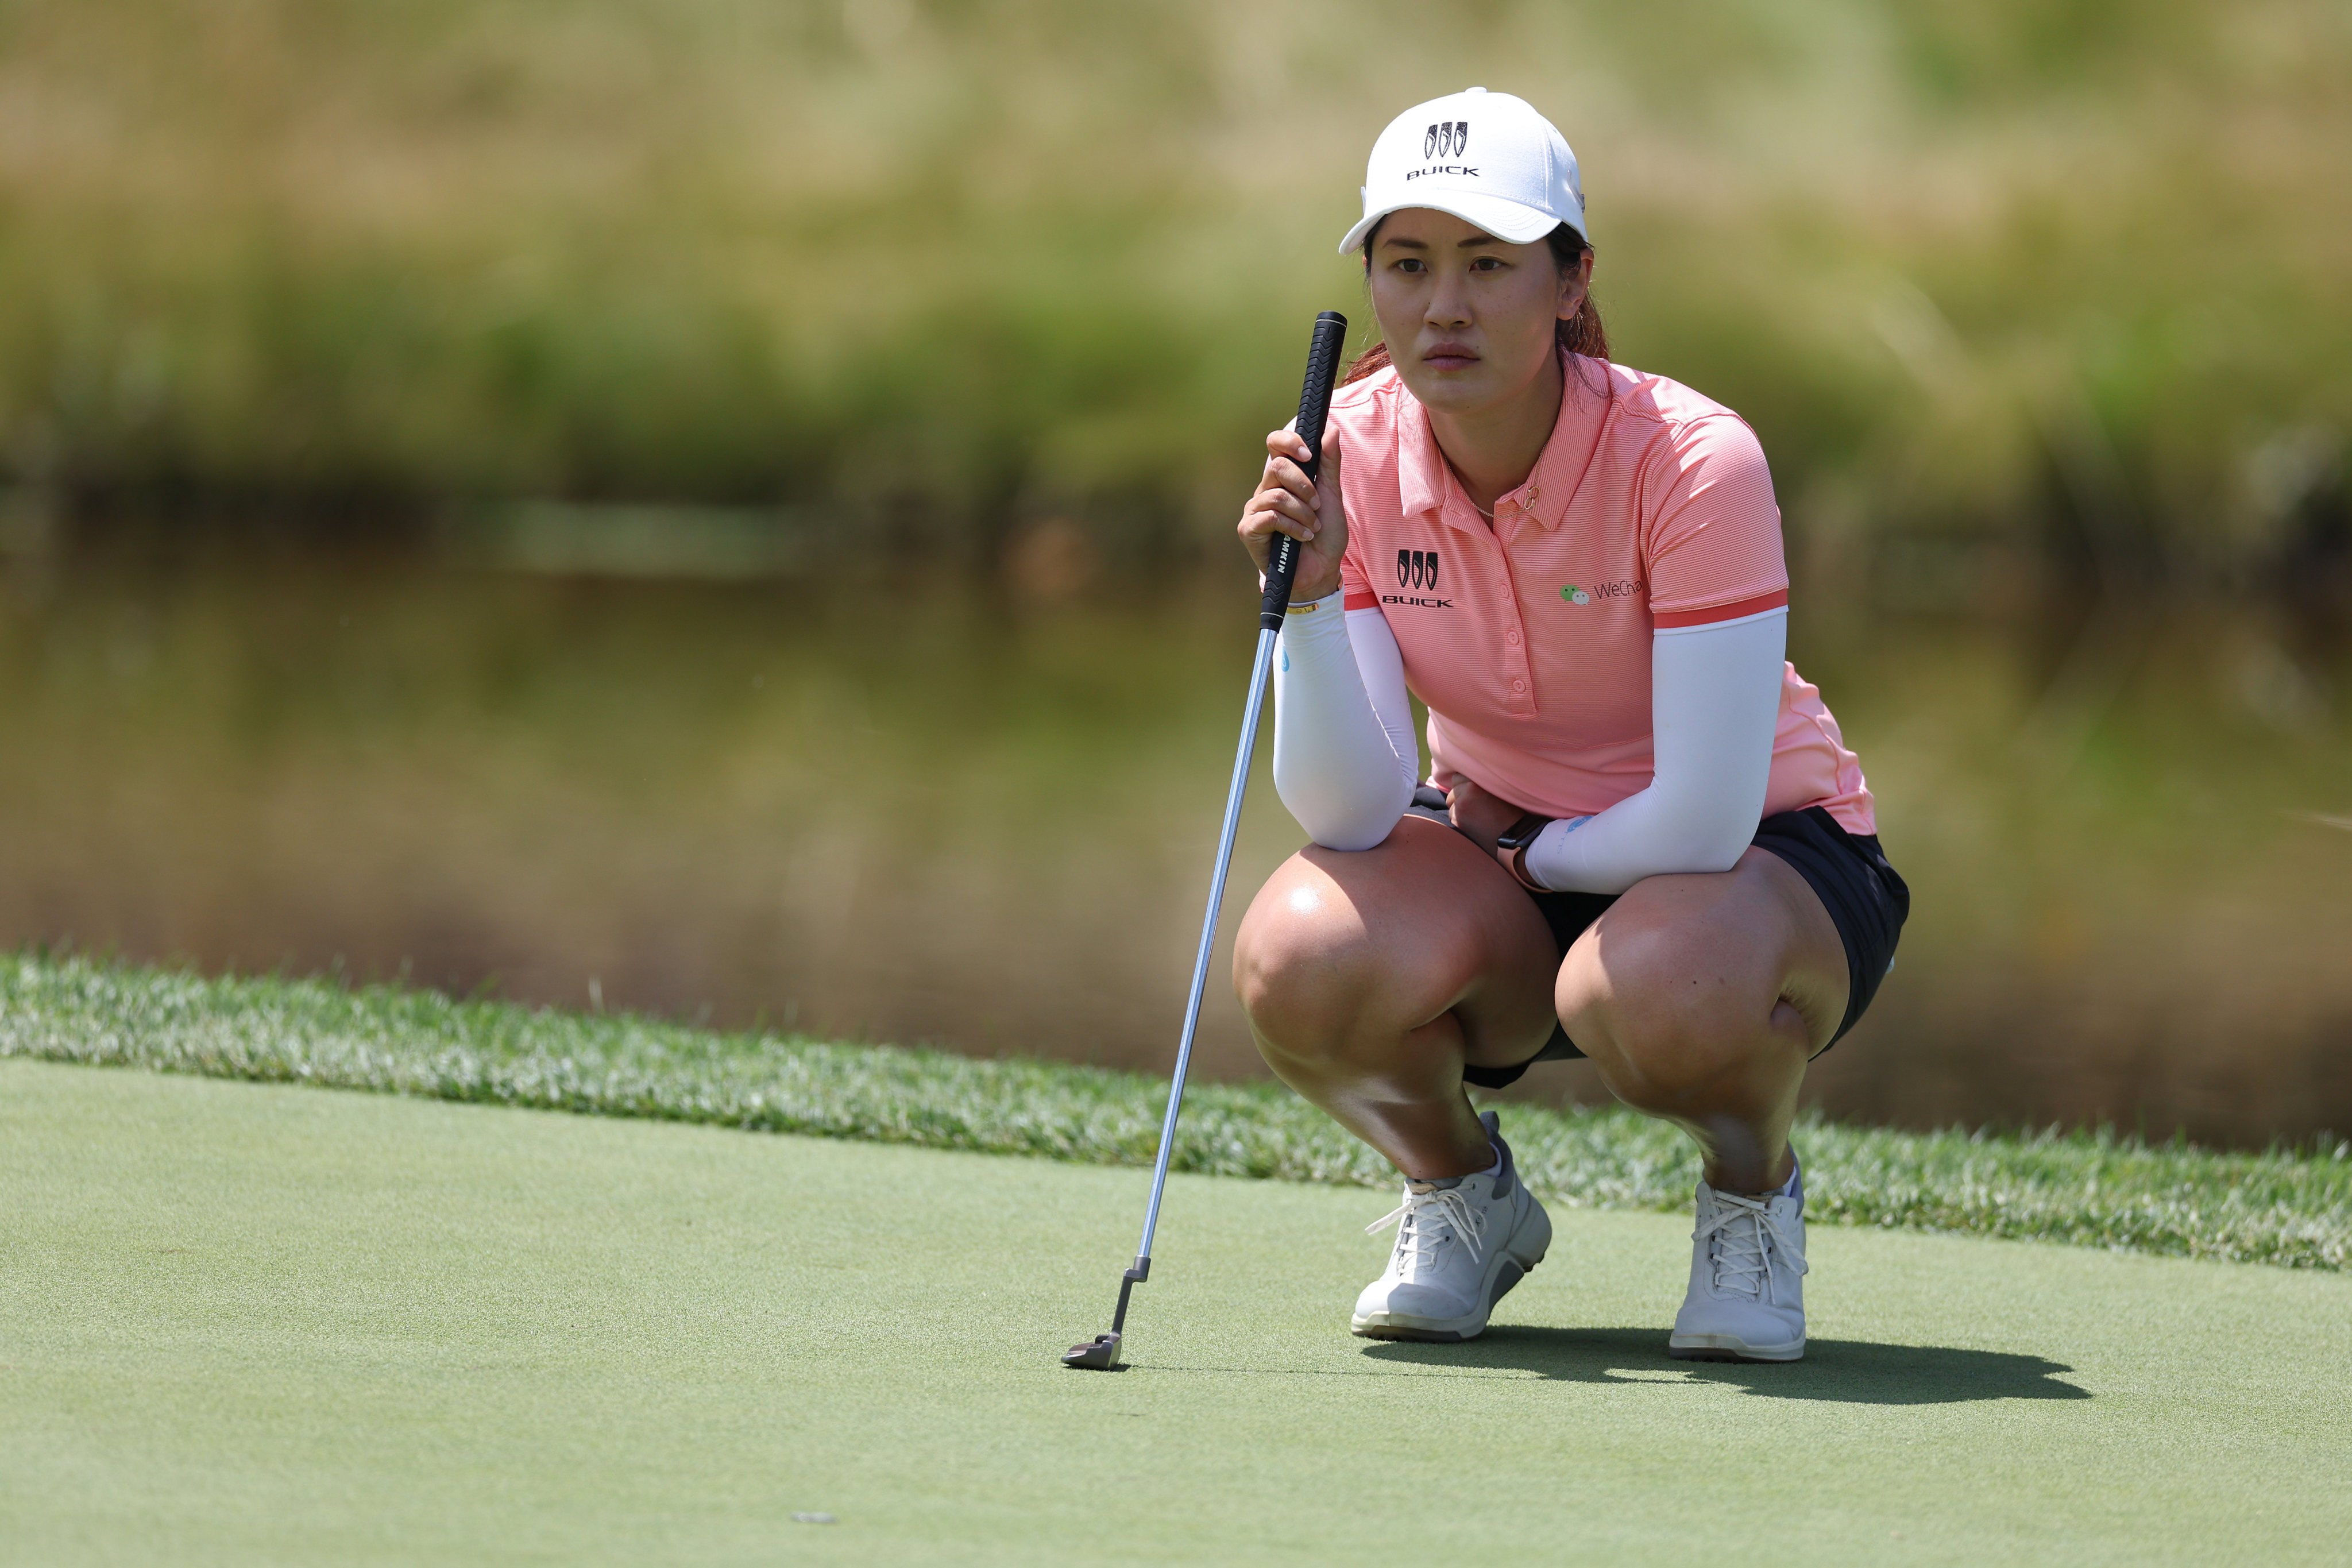 Janet Lin lines up a putt in the third round of the KPMG Women’s PGA Championship. Photo: Getty Images